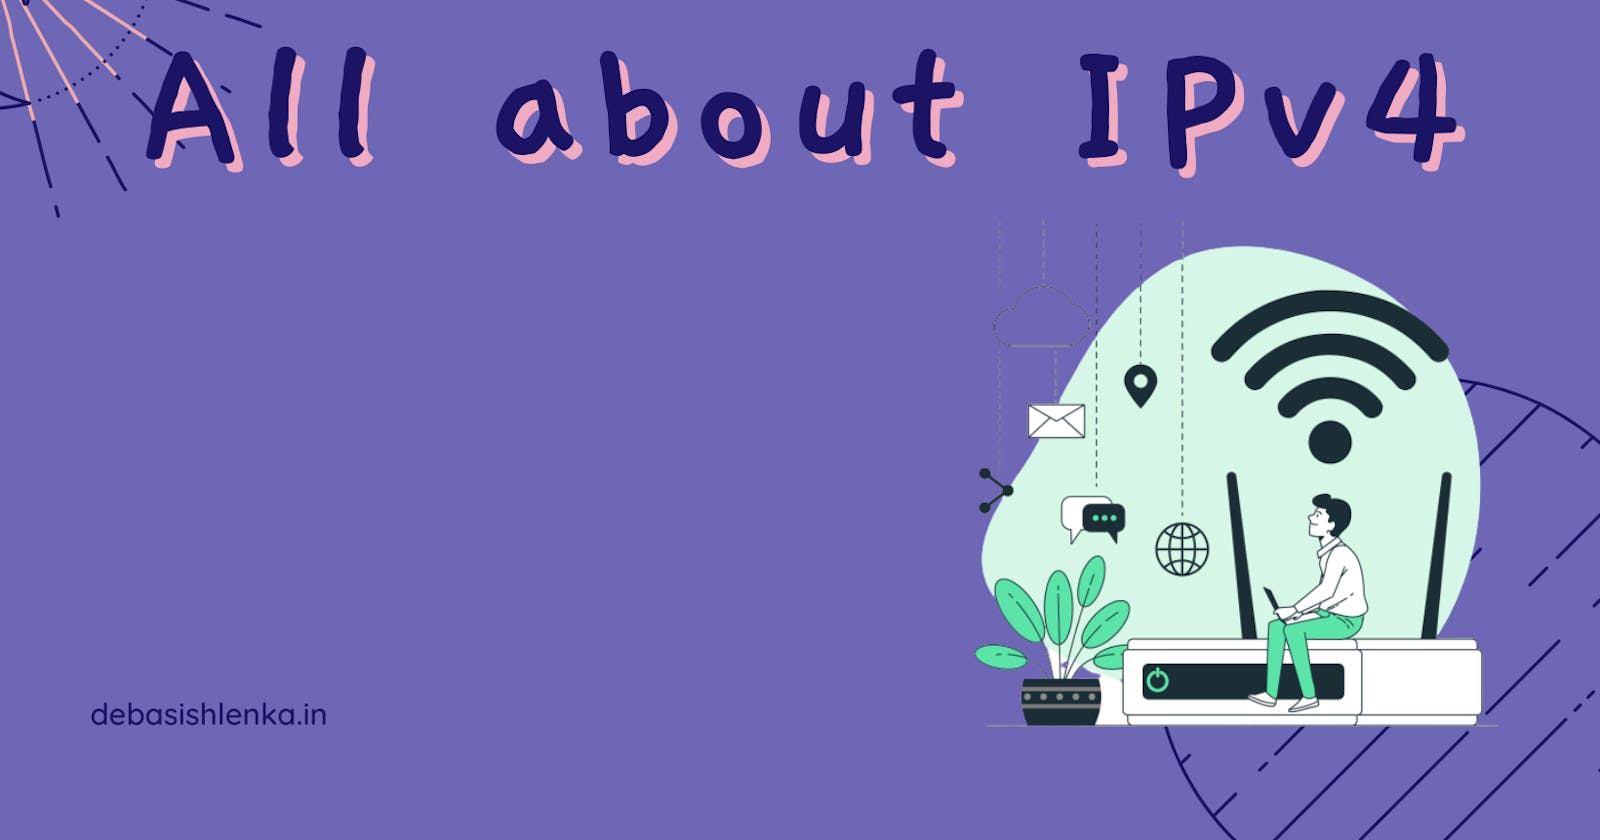 All about IPv4